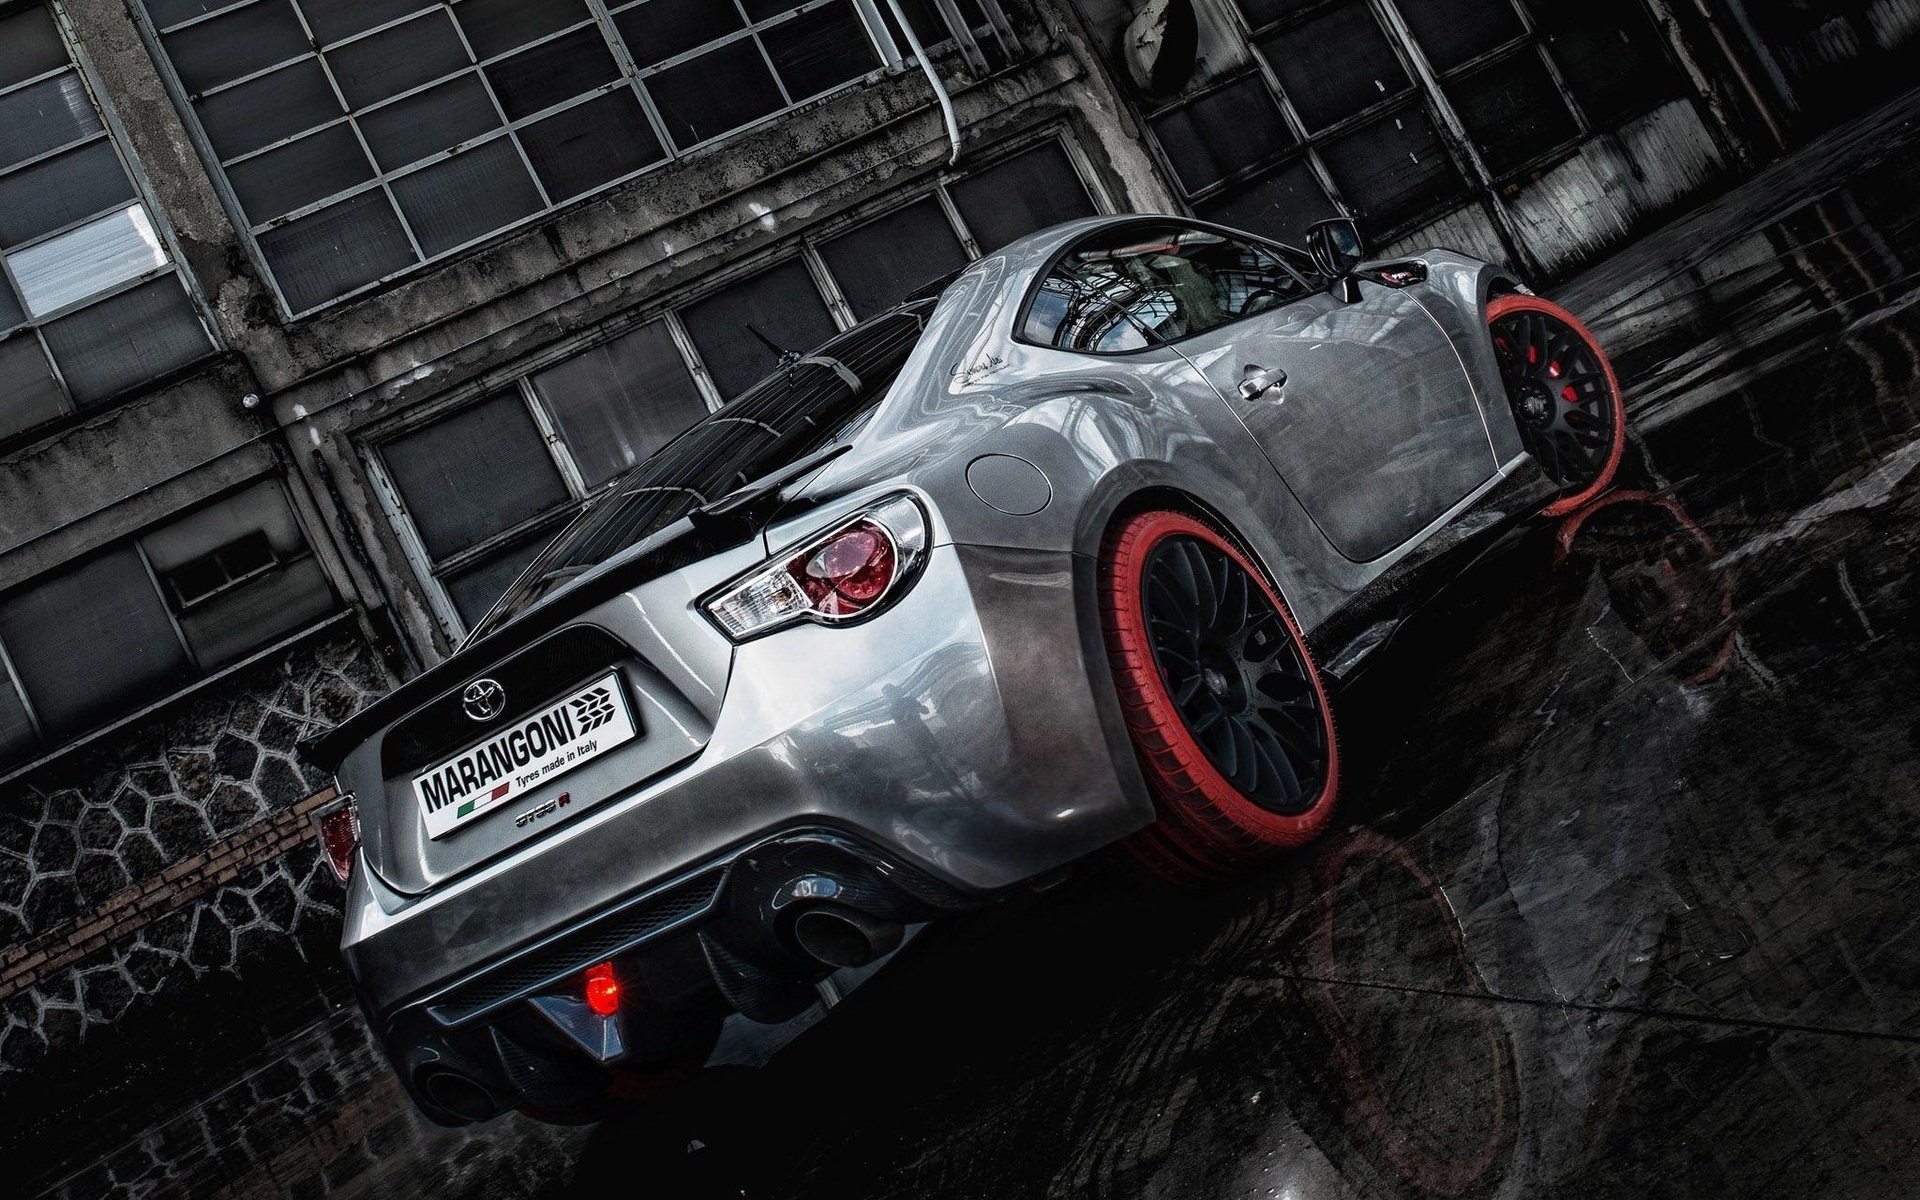 Image: Toyota, GT86-R, silver, Marangoni, red tyres, reflection